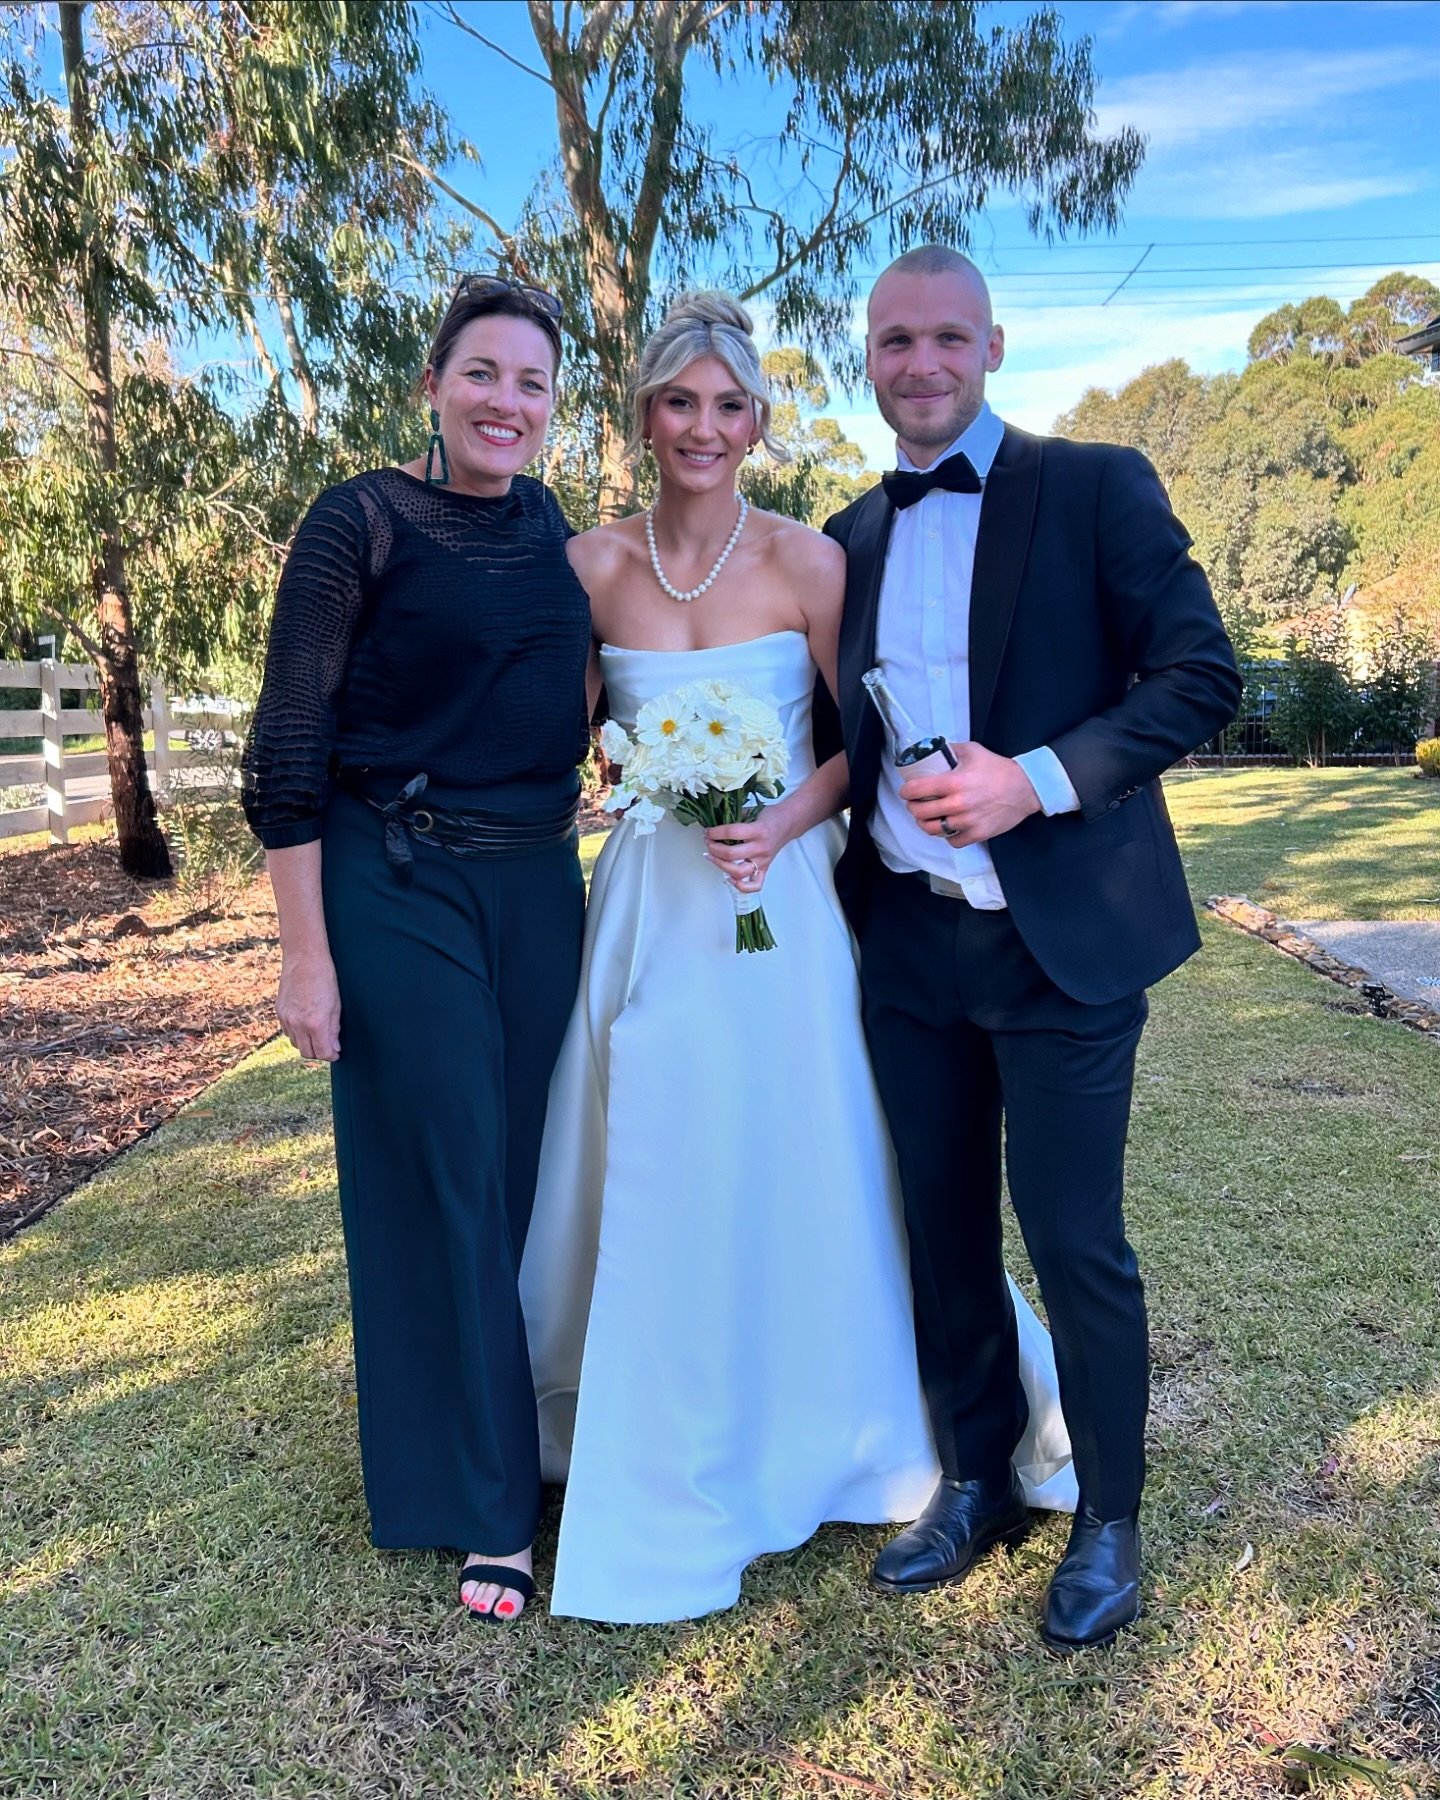 MARRIED! Sarah and Brett were hitched in the backyard of Sez&rsquo;s family home this arvo and it was completely different to their OG plan. 
.
They&rsquo;re one of many couples who have realised along the way that what they&rsquo;re planning is crea